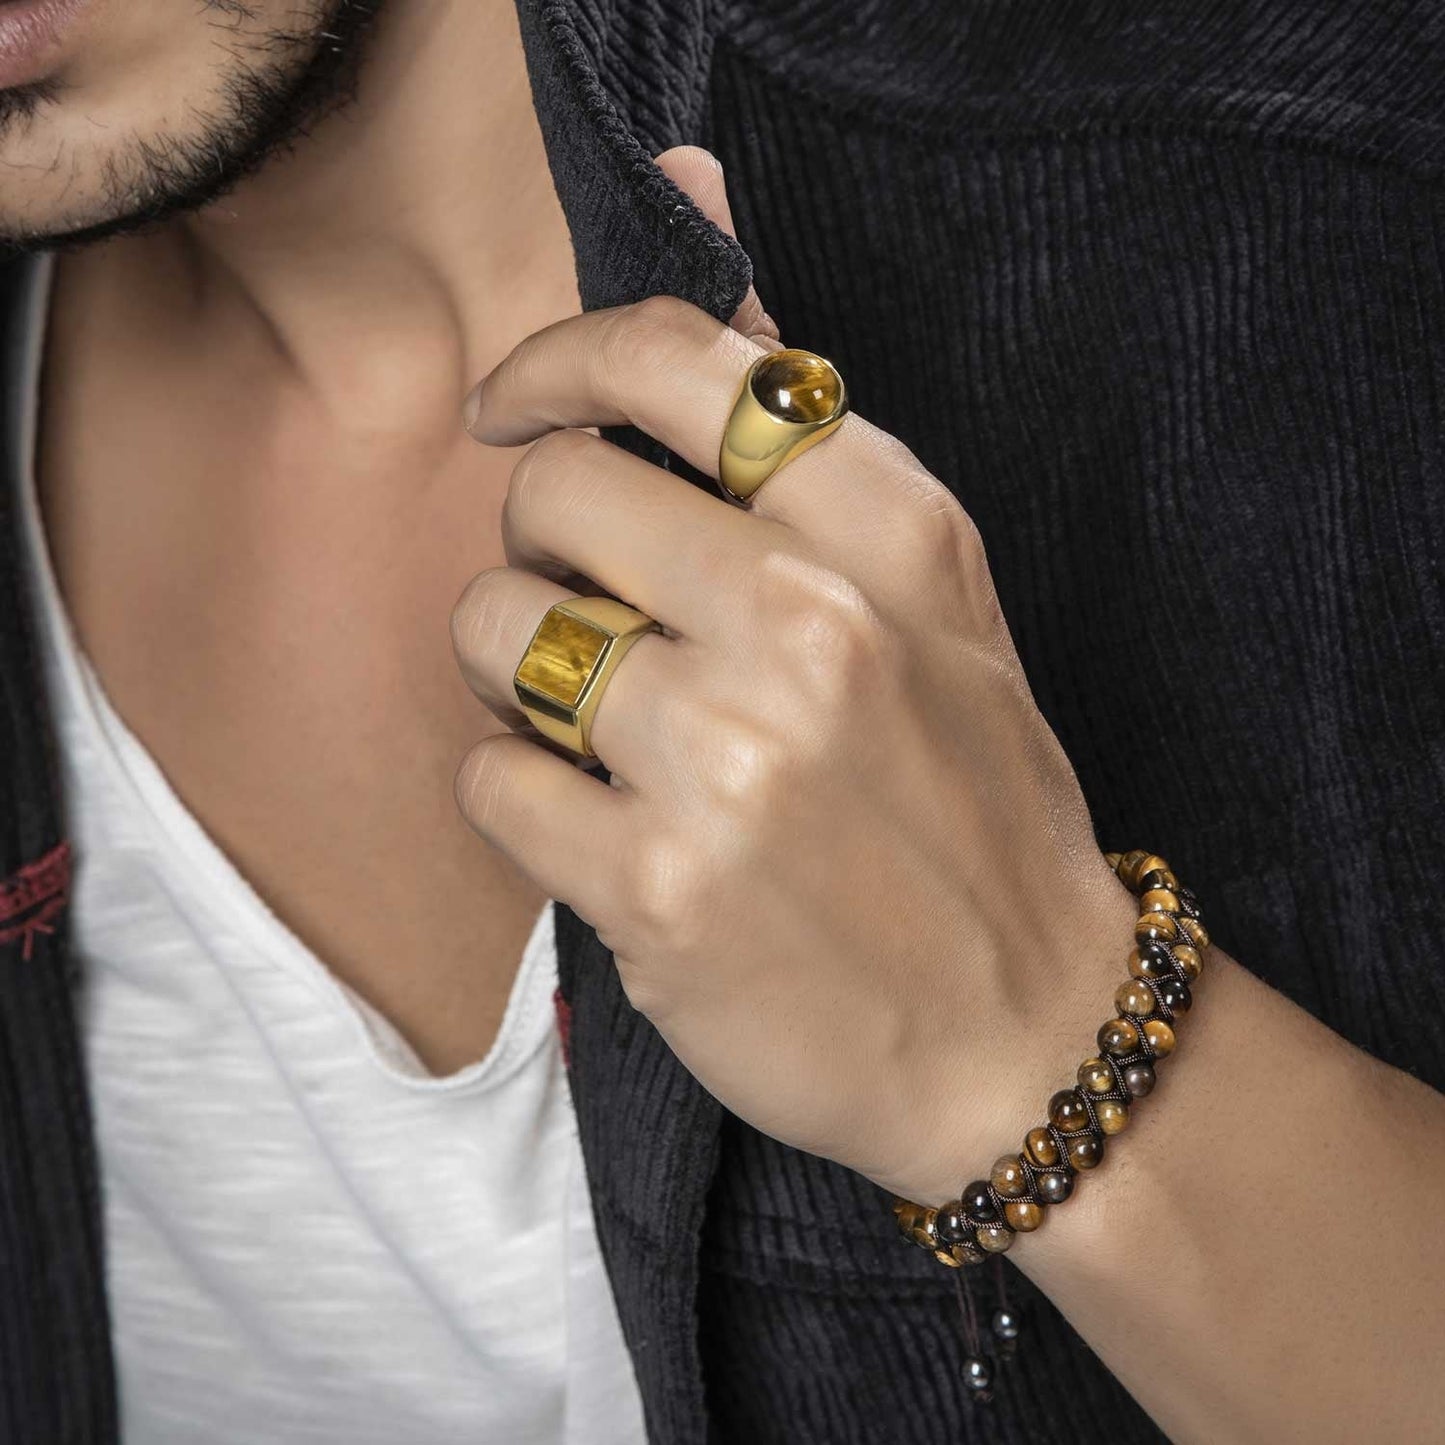 RARE PRINCE by CARAT SUTRA | Exclusive Classic Gold Signet Statement Ring with Natural Pearl/ Tiger Eye, Sterling Silver 925 Ring | Jewellery for Men| With Certificate of Authenticity and 925 Hallmark - caratsutra